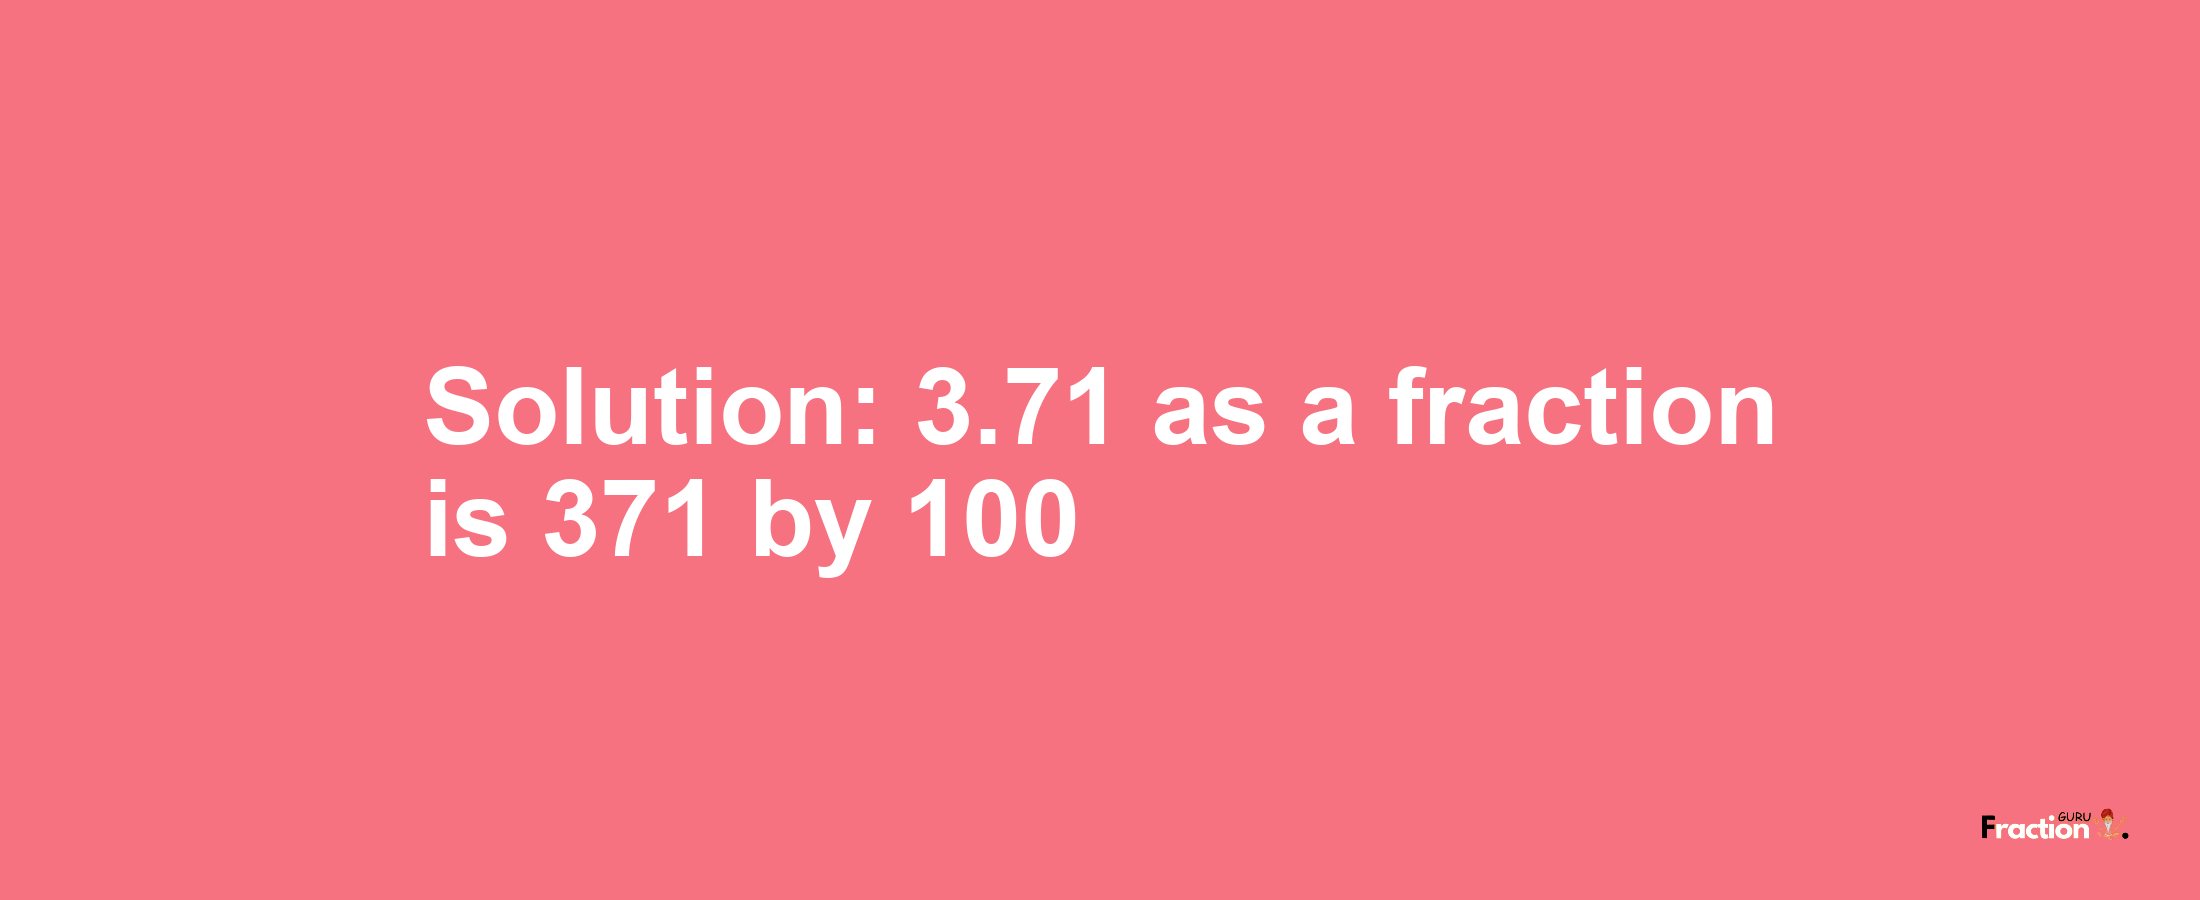 Solution:3.71 as a fraction is 371/100